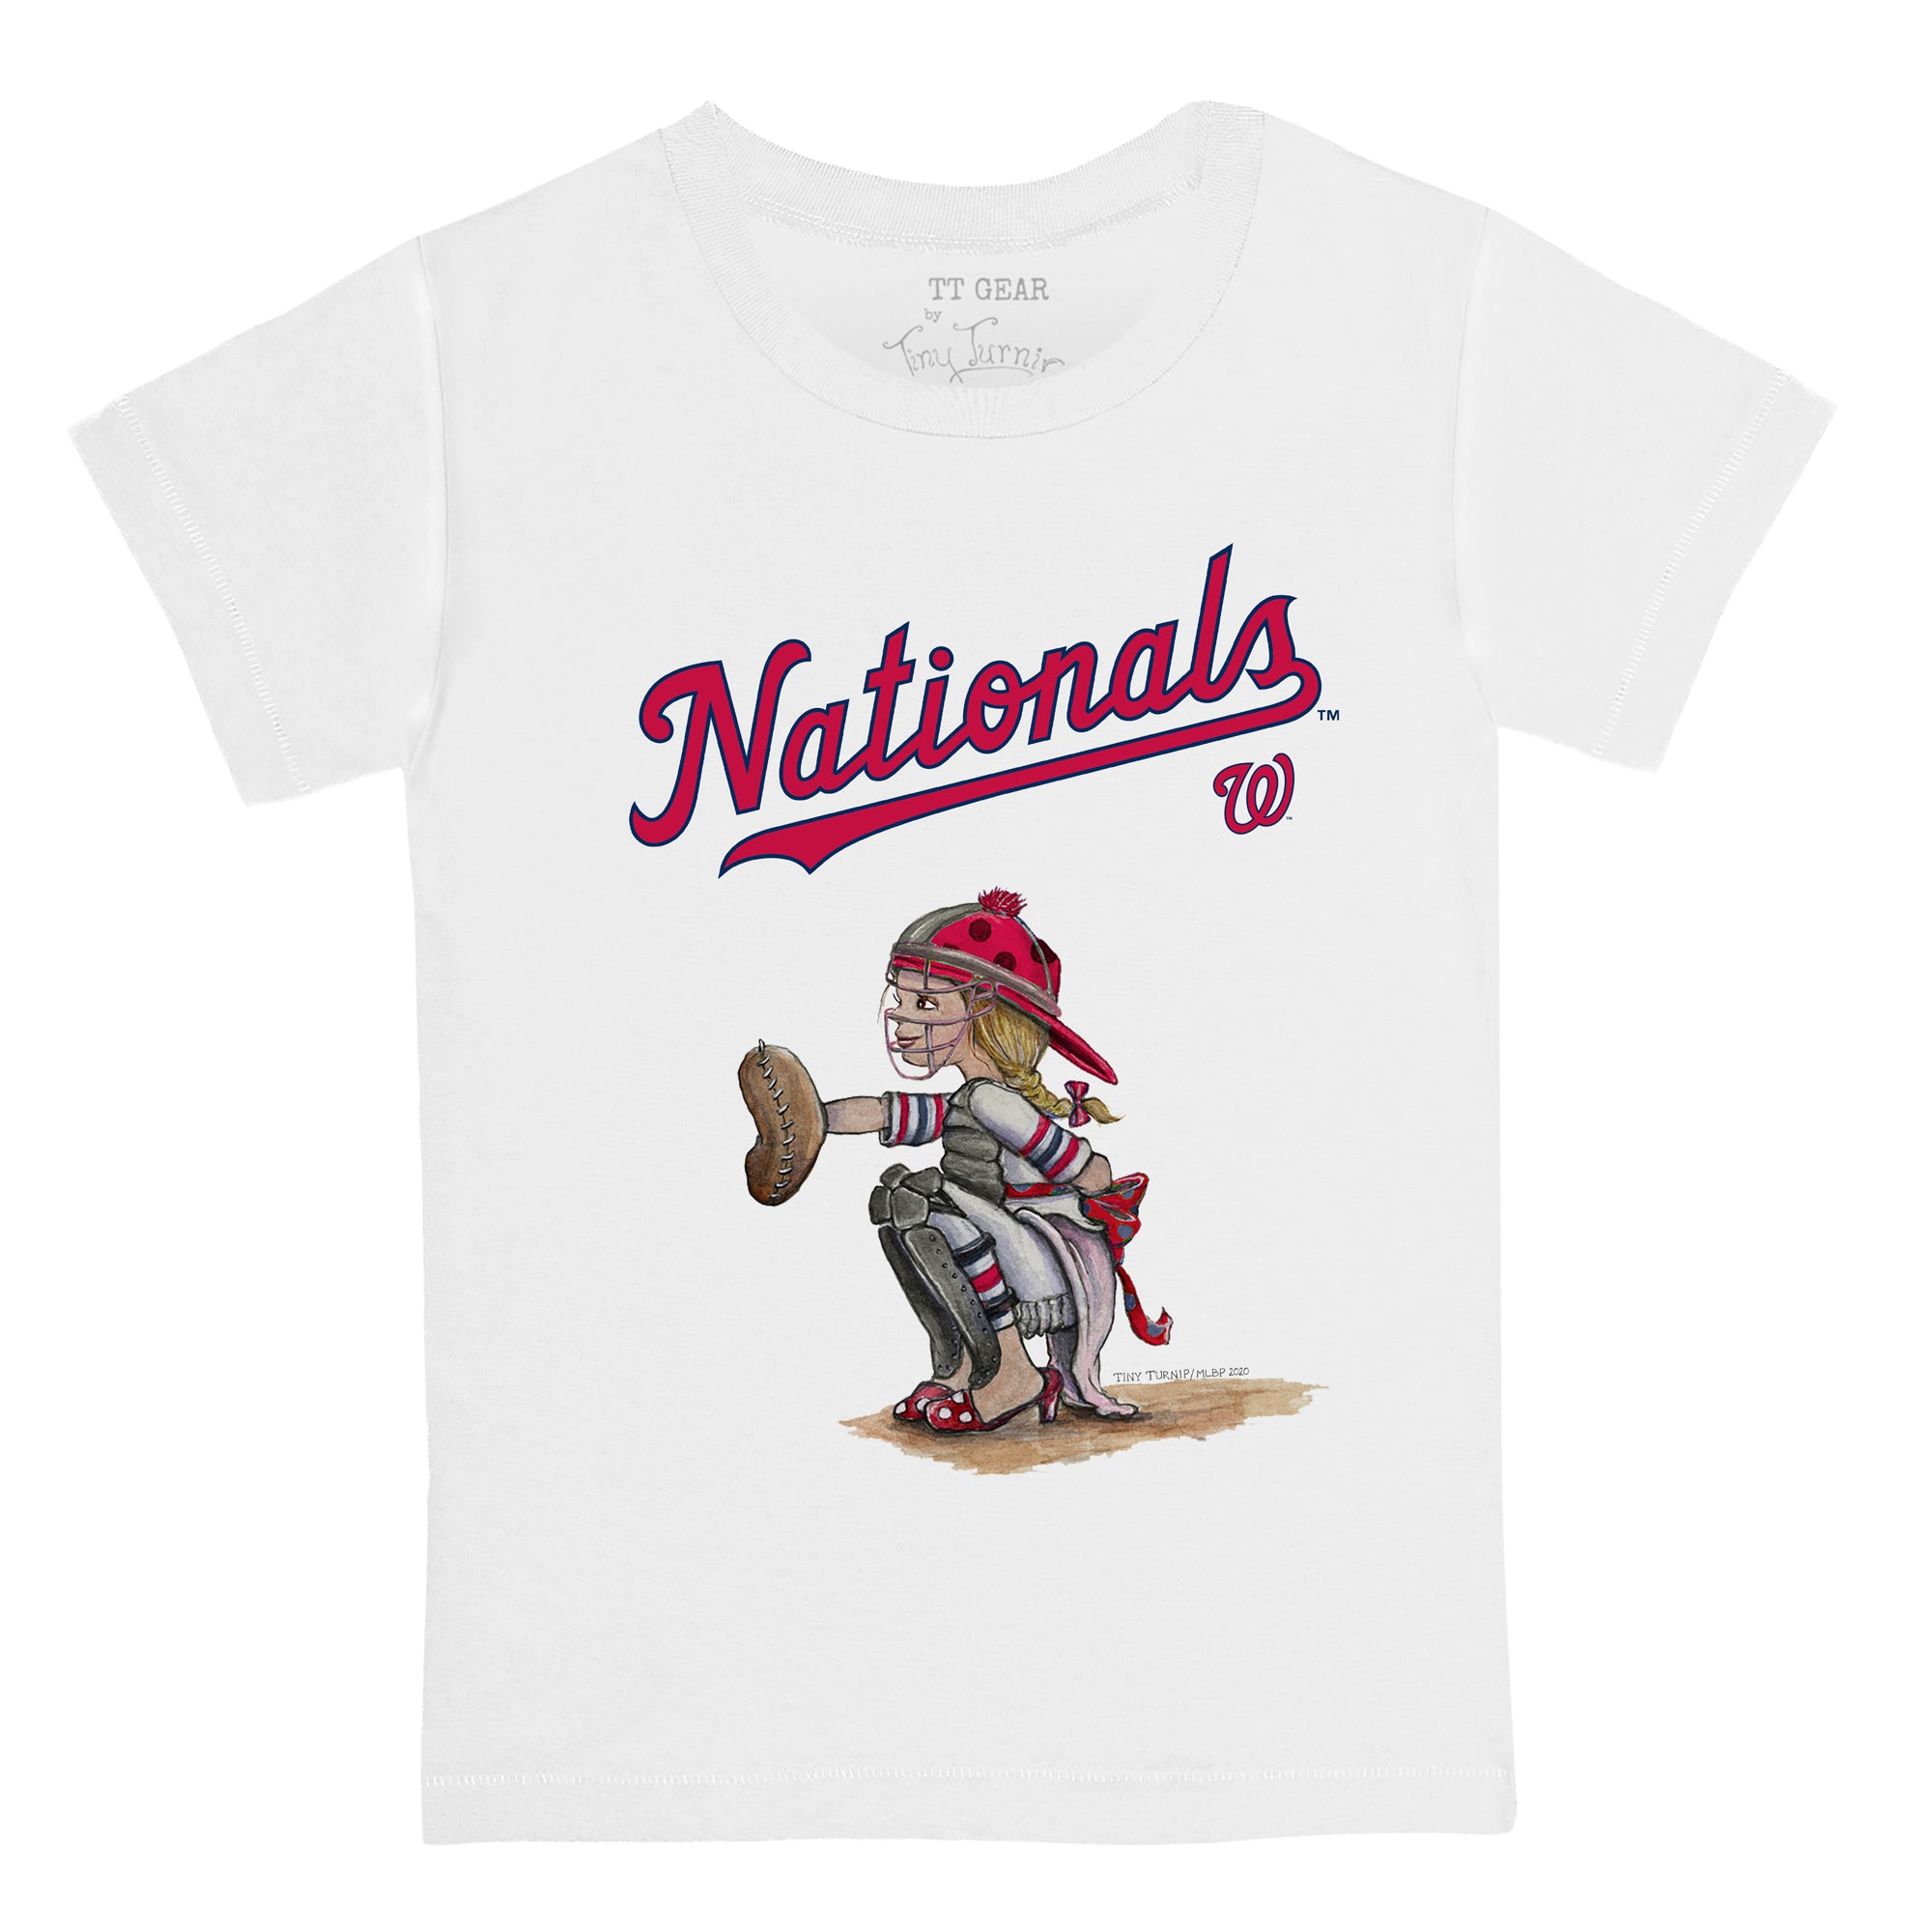 Washington Nationals Ladies Clothing, Nationals Majestic Women's Apparel  and Gear